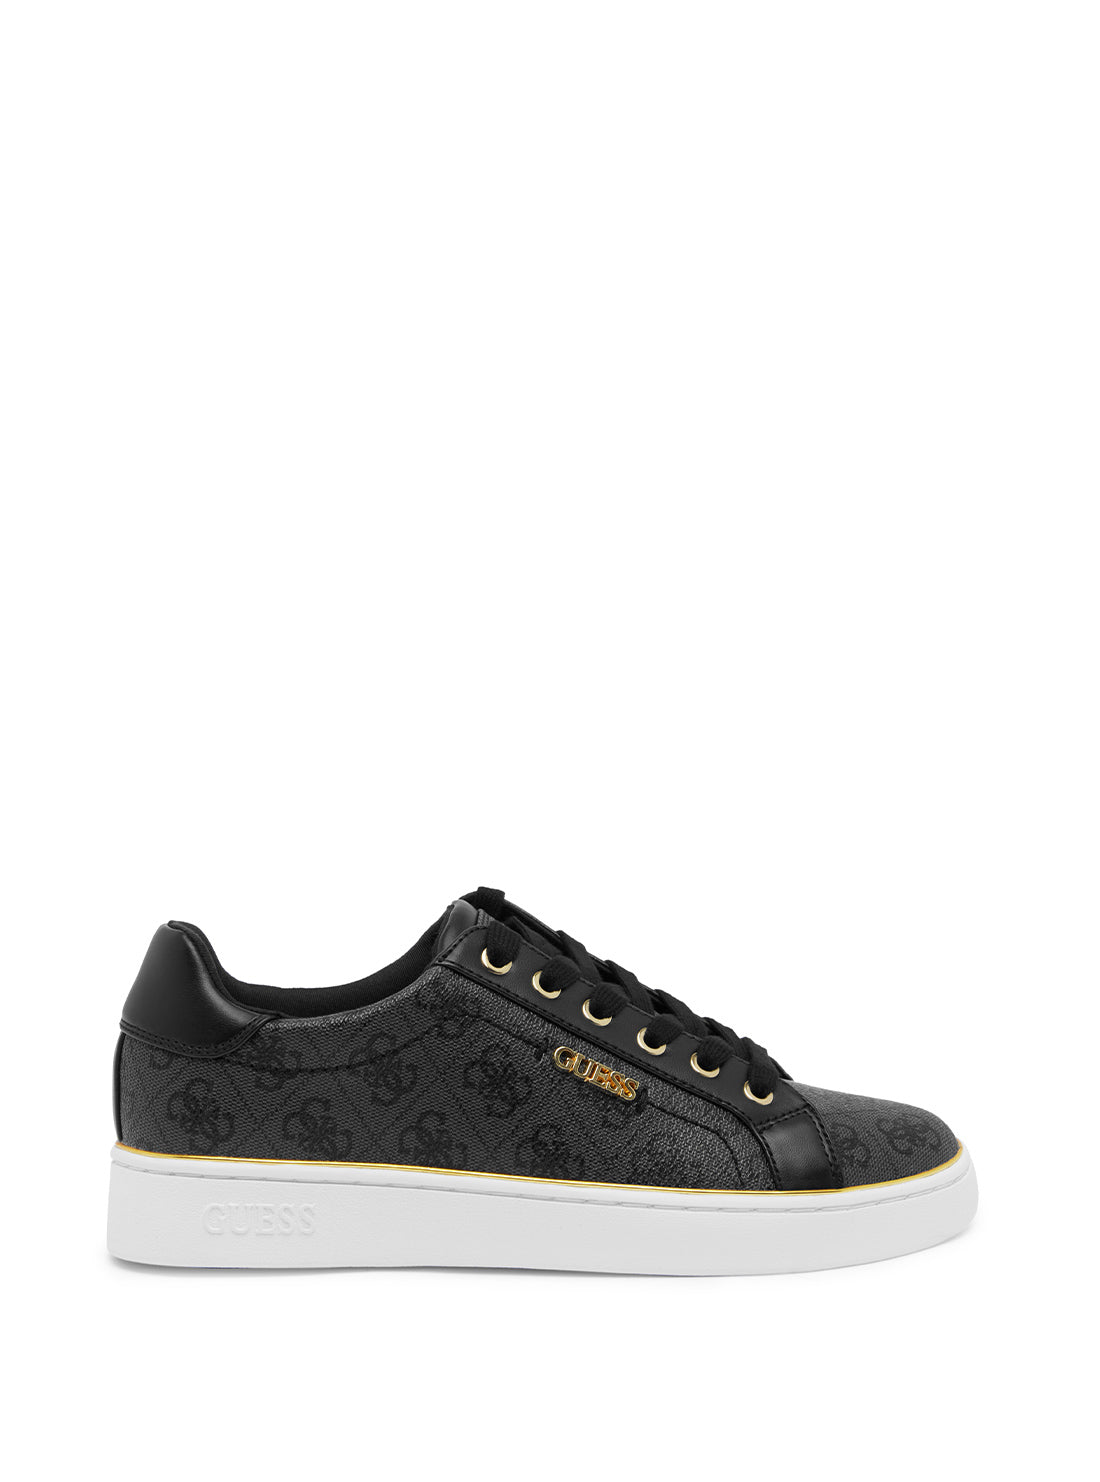 Black Logo Beckie Sneakers | GUESS Women's Shoes | side view